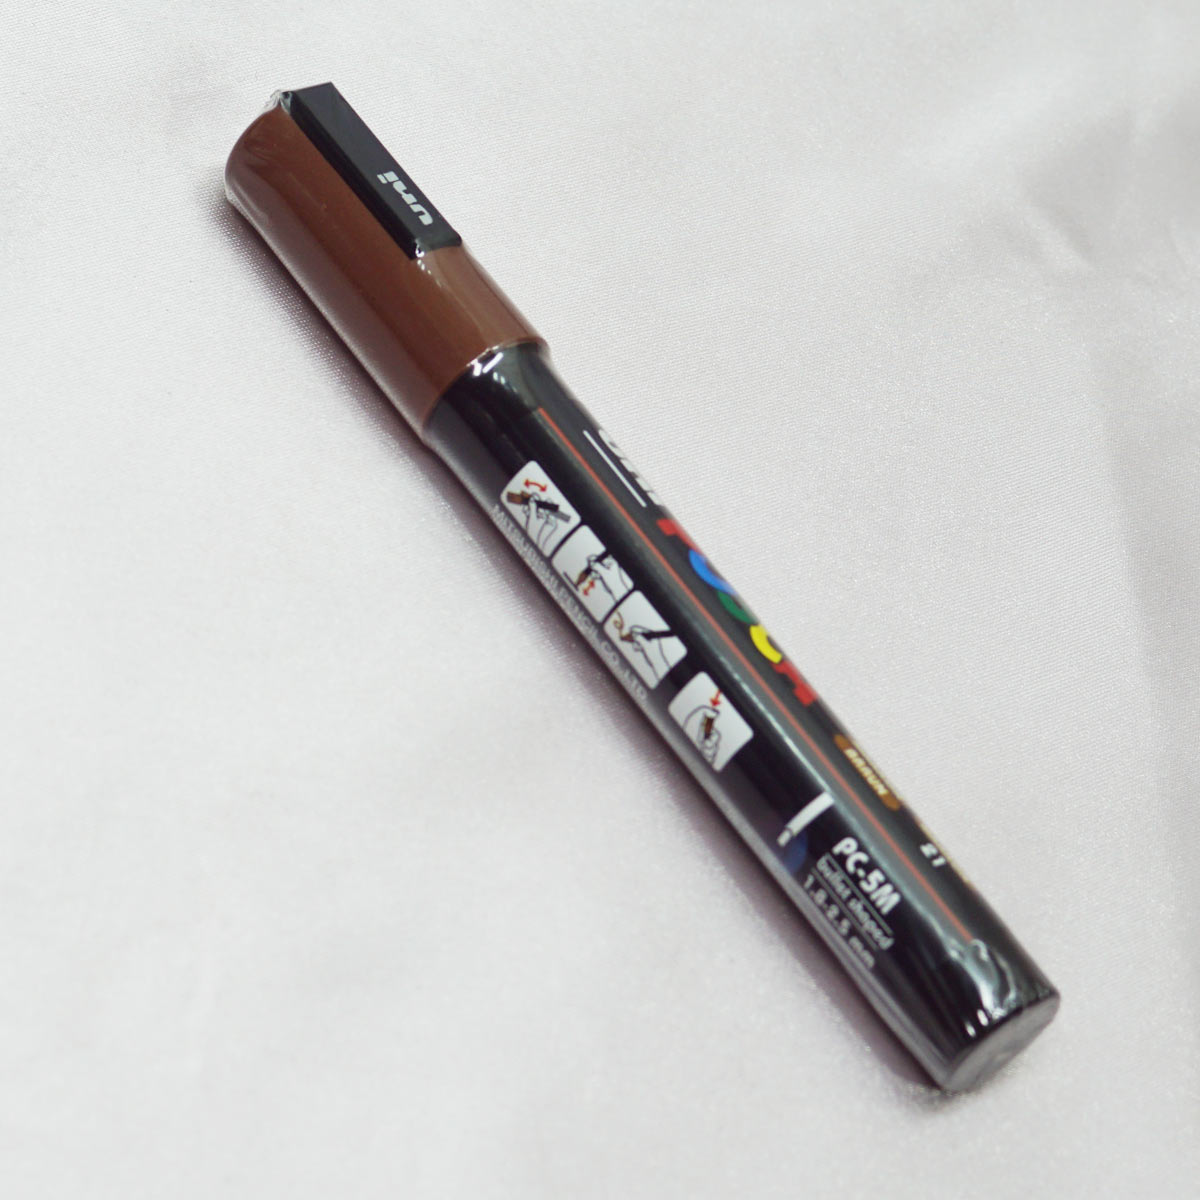 Uniball Posca PC-5M Bullet Medium Tip 1.8 - 2.5mm Opaque Brown Color and Water Based Paint Marker SKU 22479